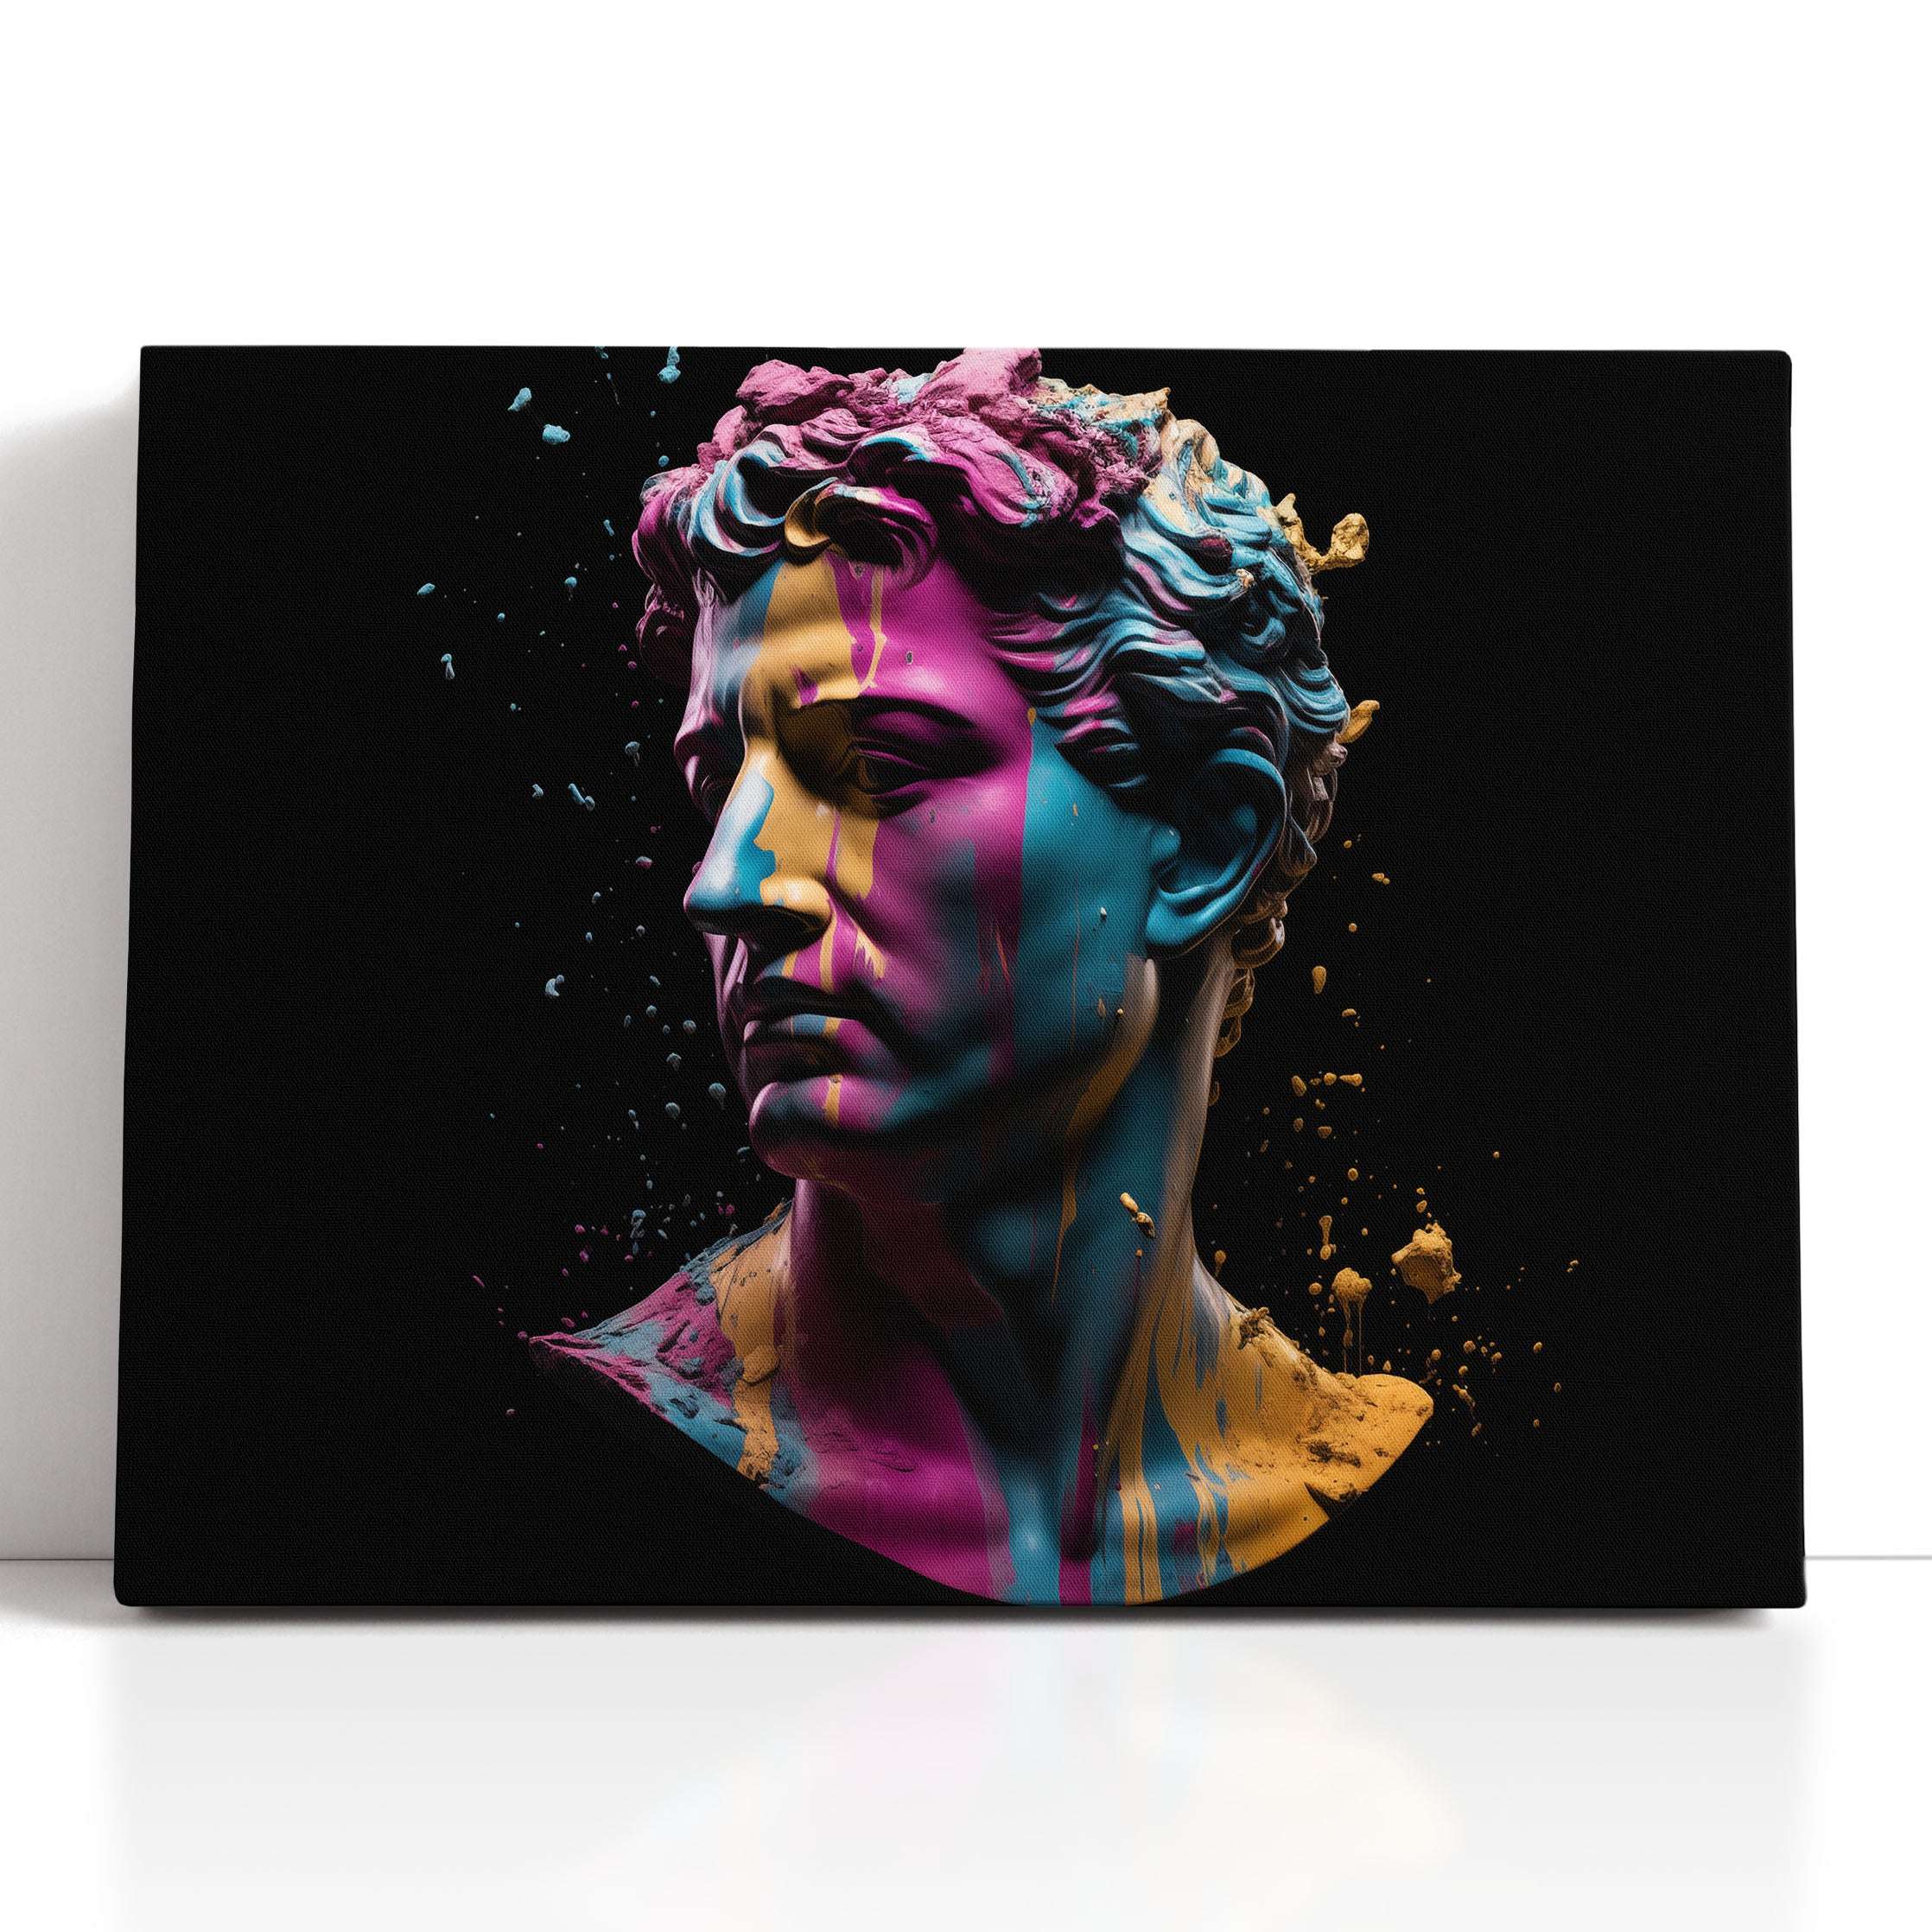 Classic Sculpture with a Modern Neon Twist - Canvas Print - Artoholica Ready to Hang Canvas Print